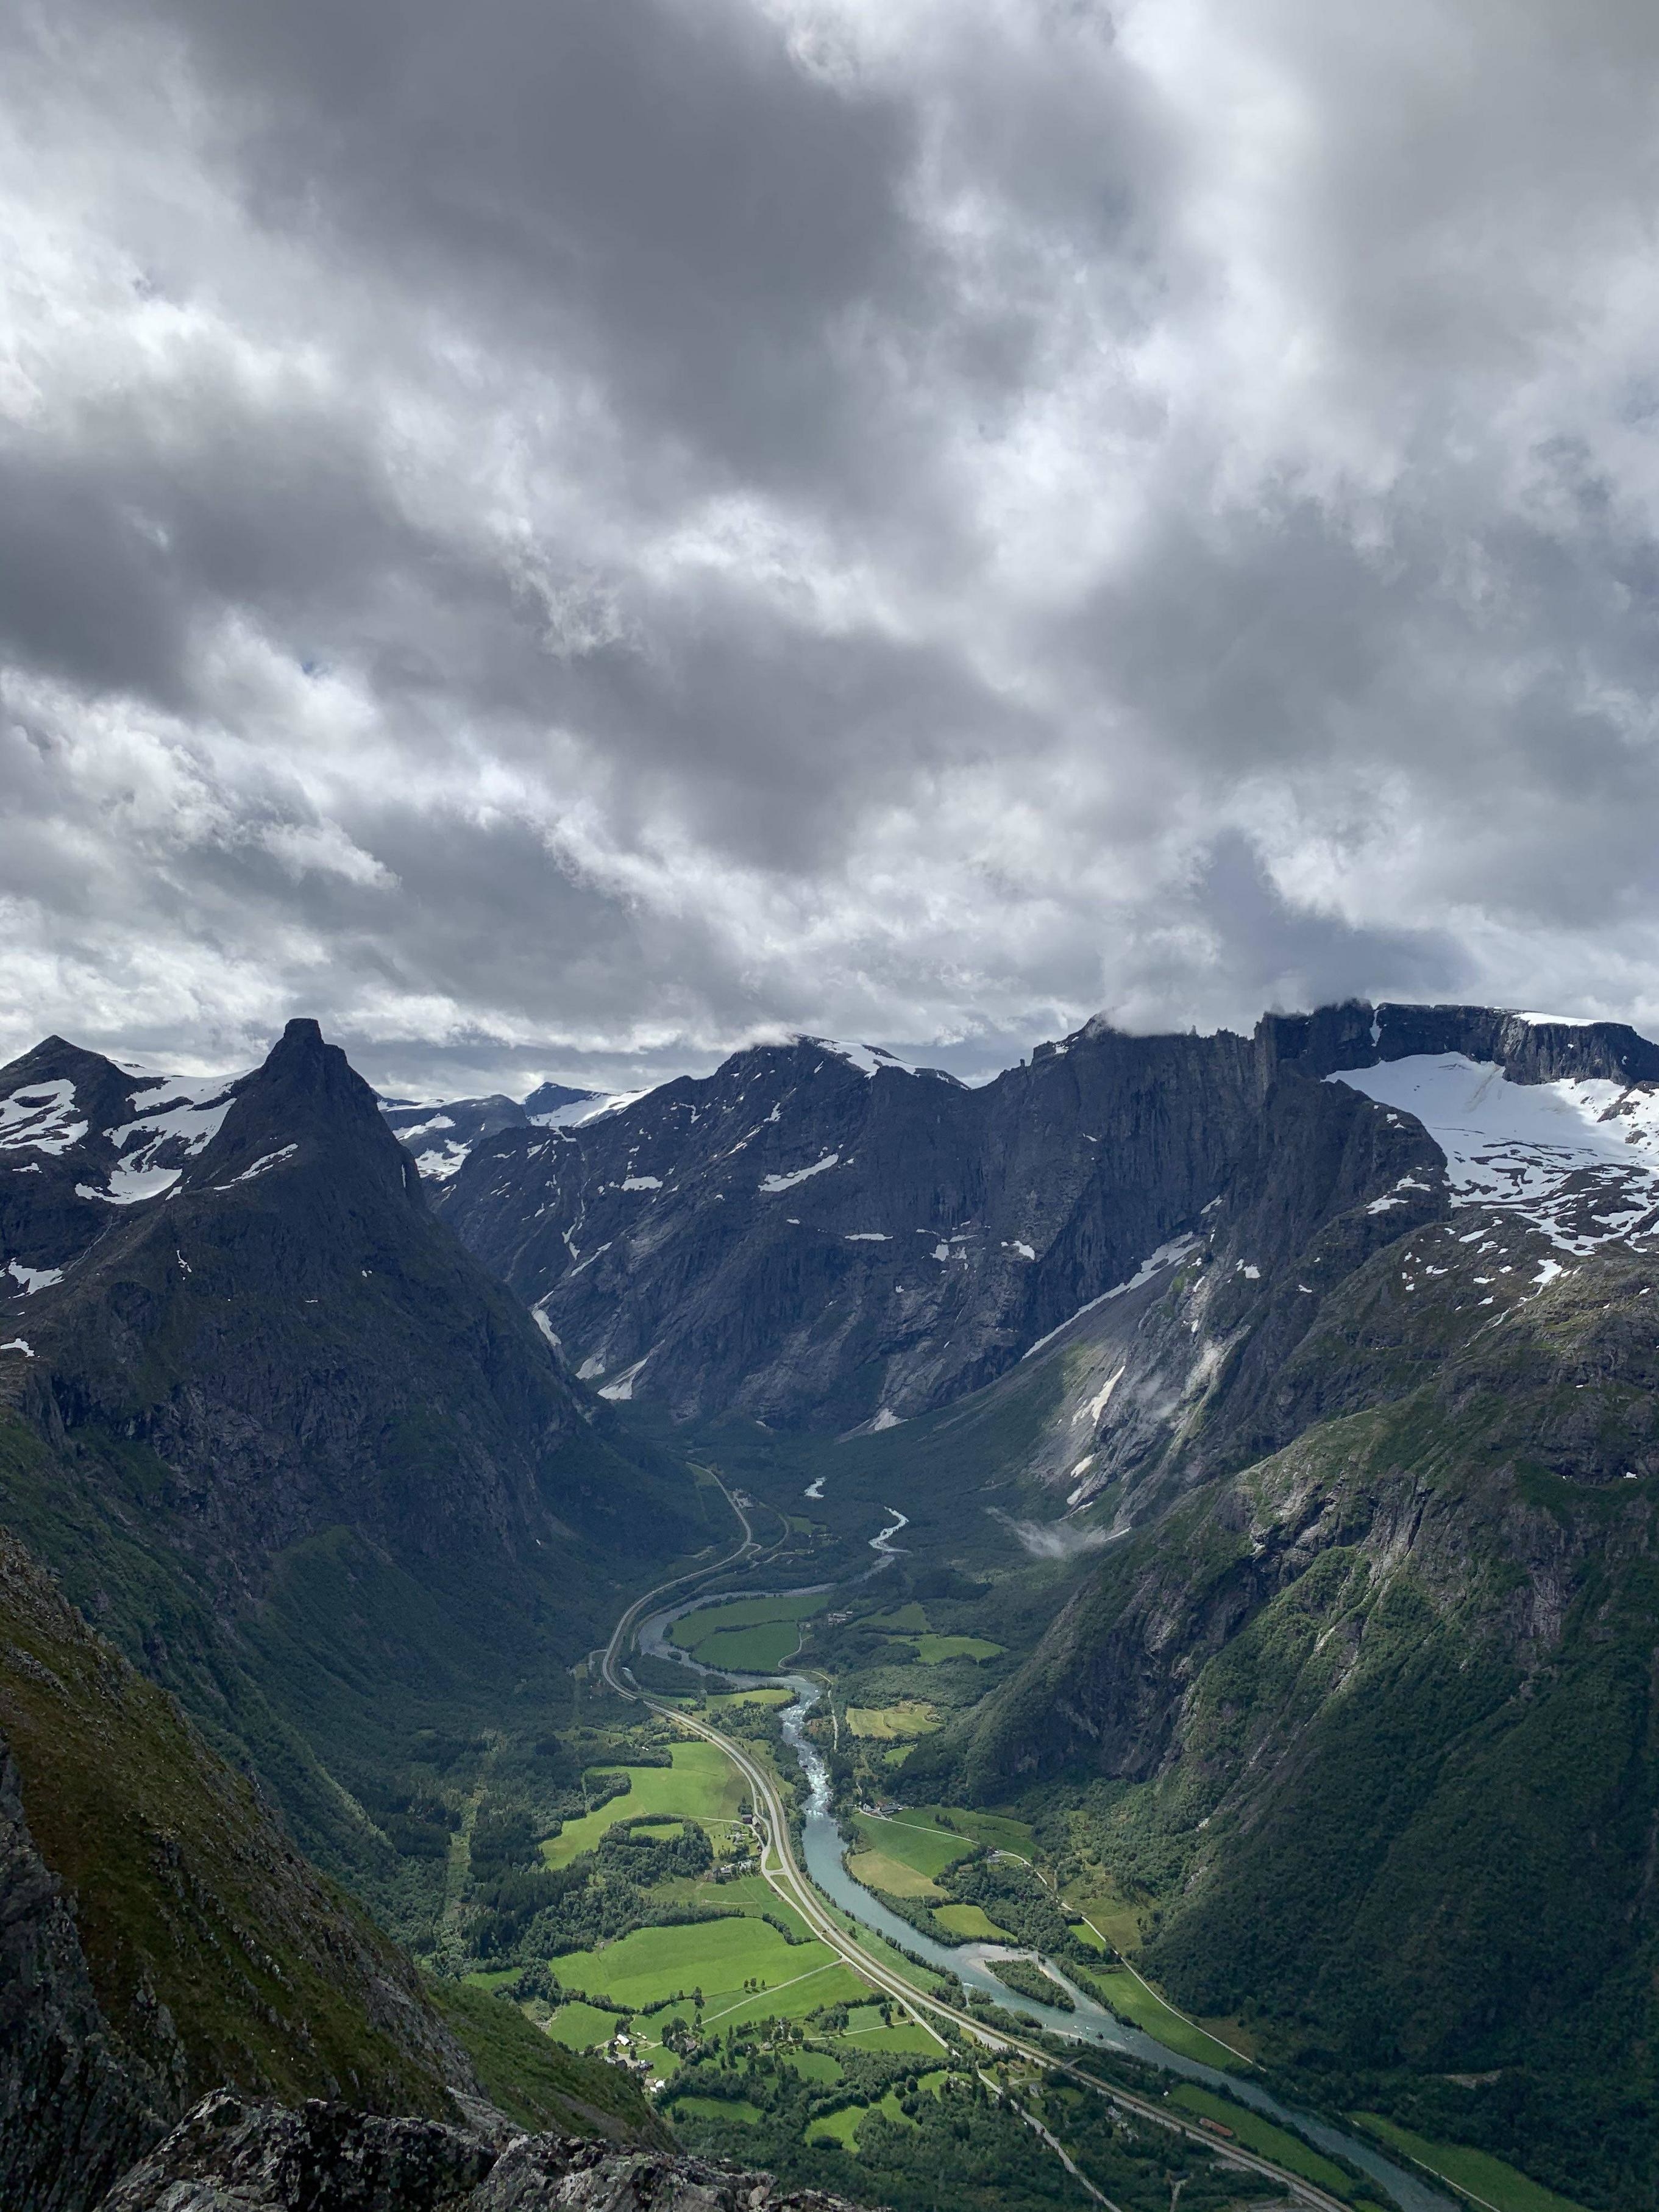 A picture from the top of the mountains in Romsdalen, with a river and lush green field below in the valleys